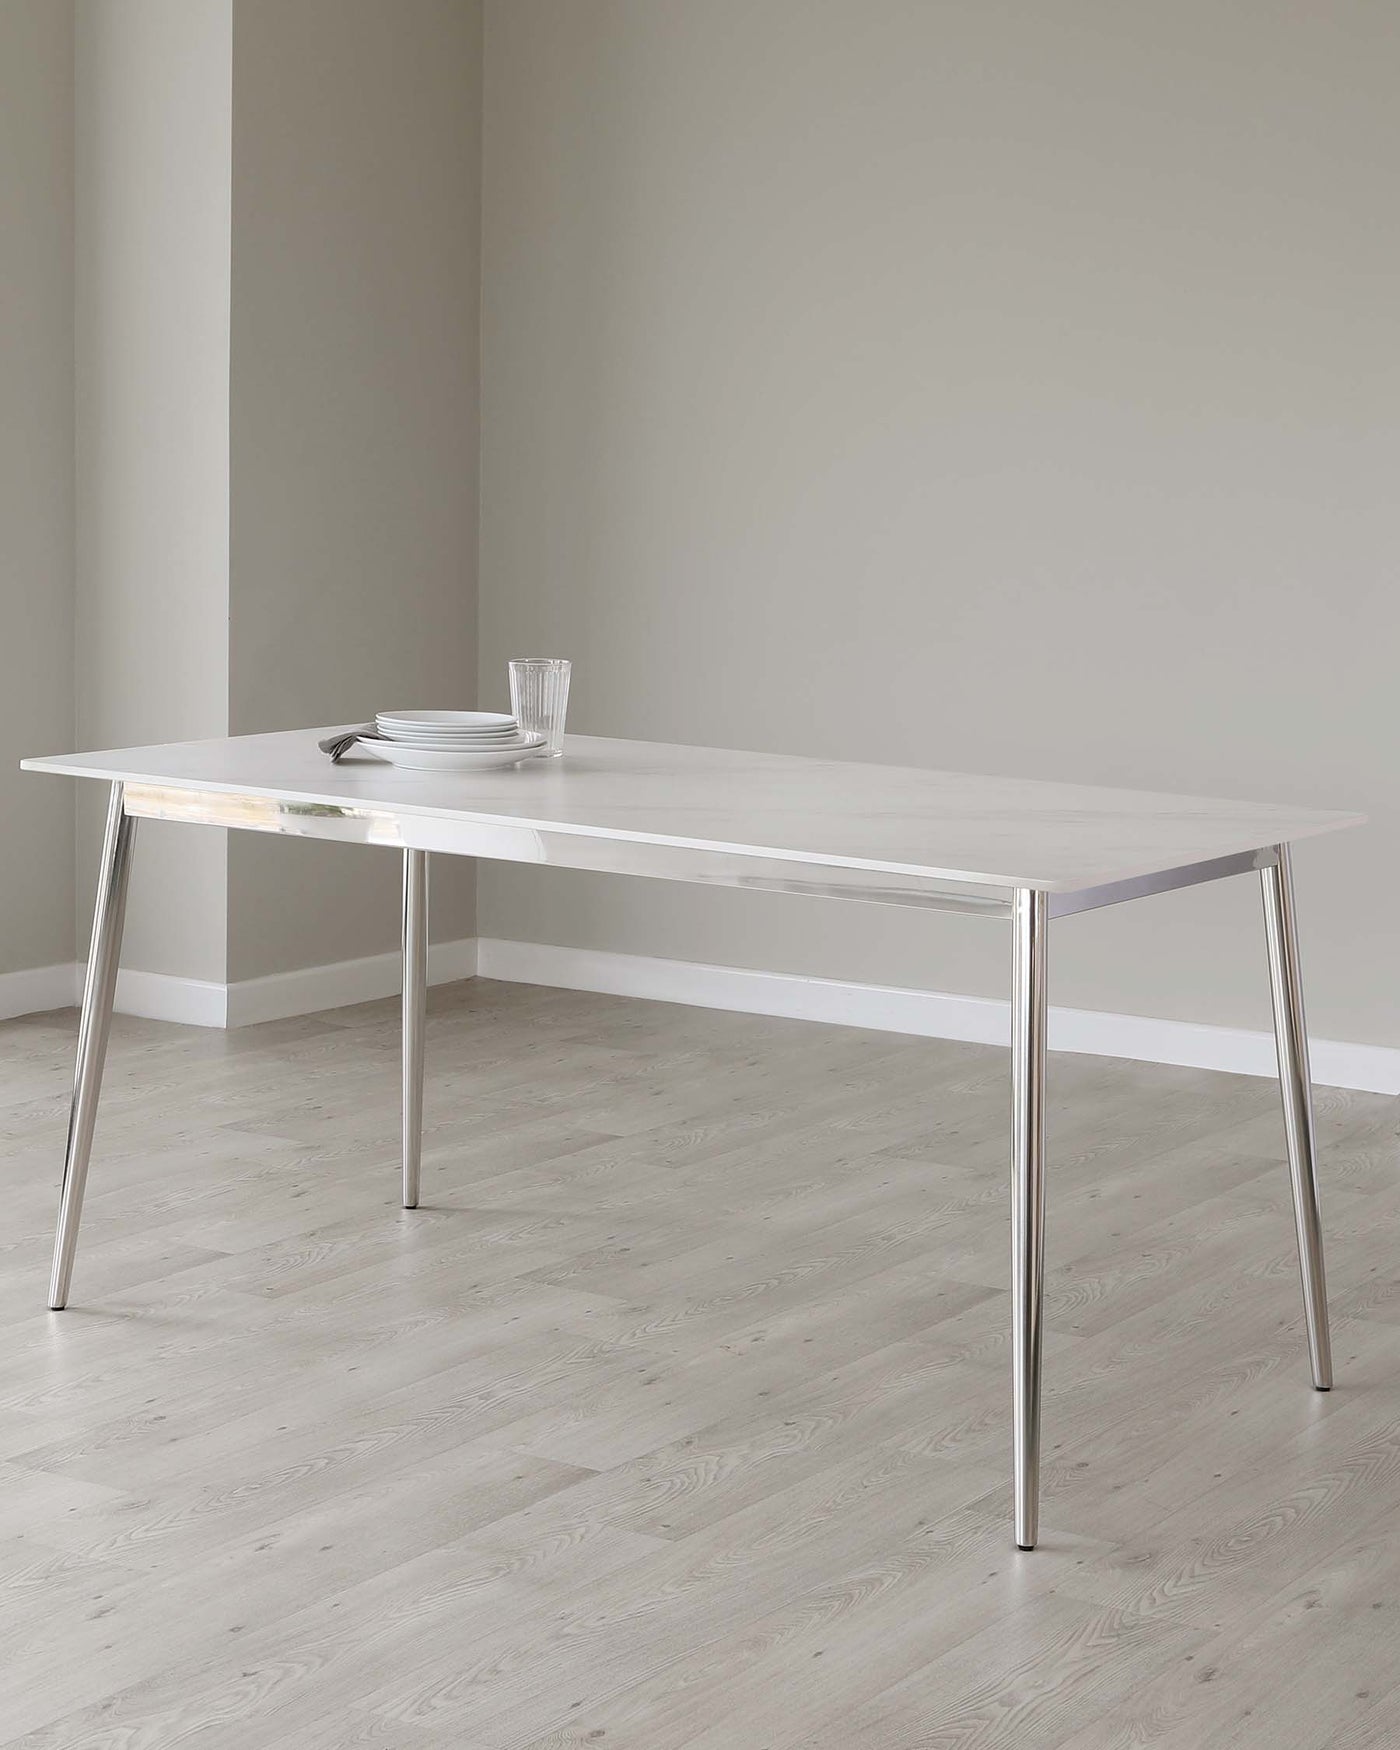 A modern minimalist white dining table with slender silver metal legs, set in a room with light grey walls and pale wooden flooring. The table is adorned with a simple set of white plates, a clear glass, and a pair of silver cutlery.